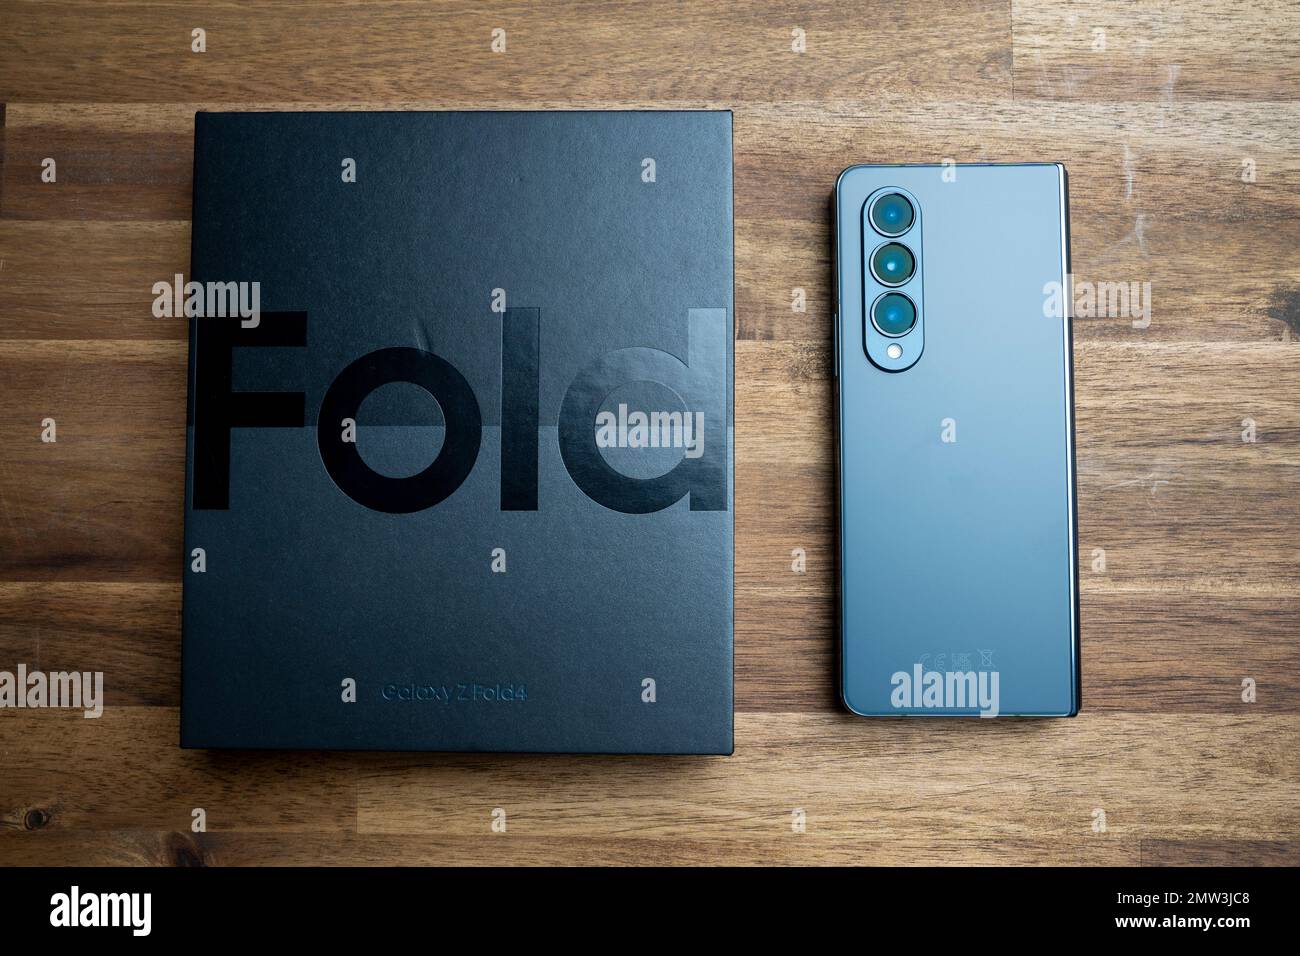 Brand new Samsung Galaxy Z Fold 4 in grey-green color. The device is in the closed position. Stock Photo